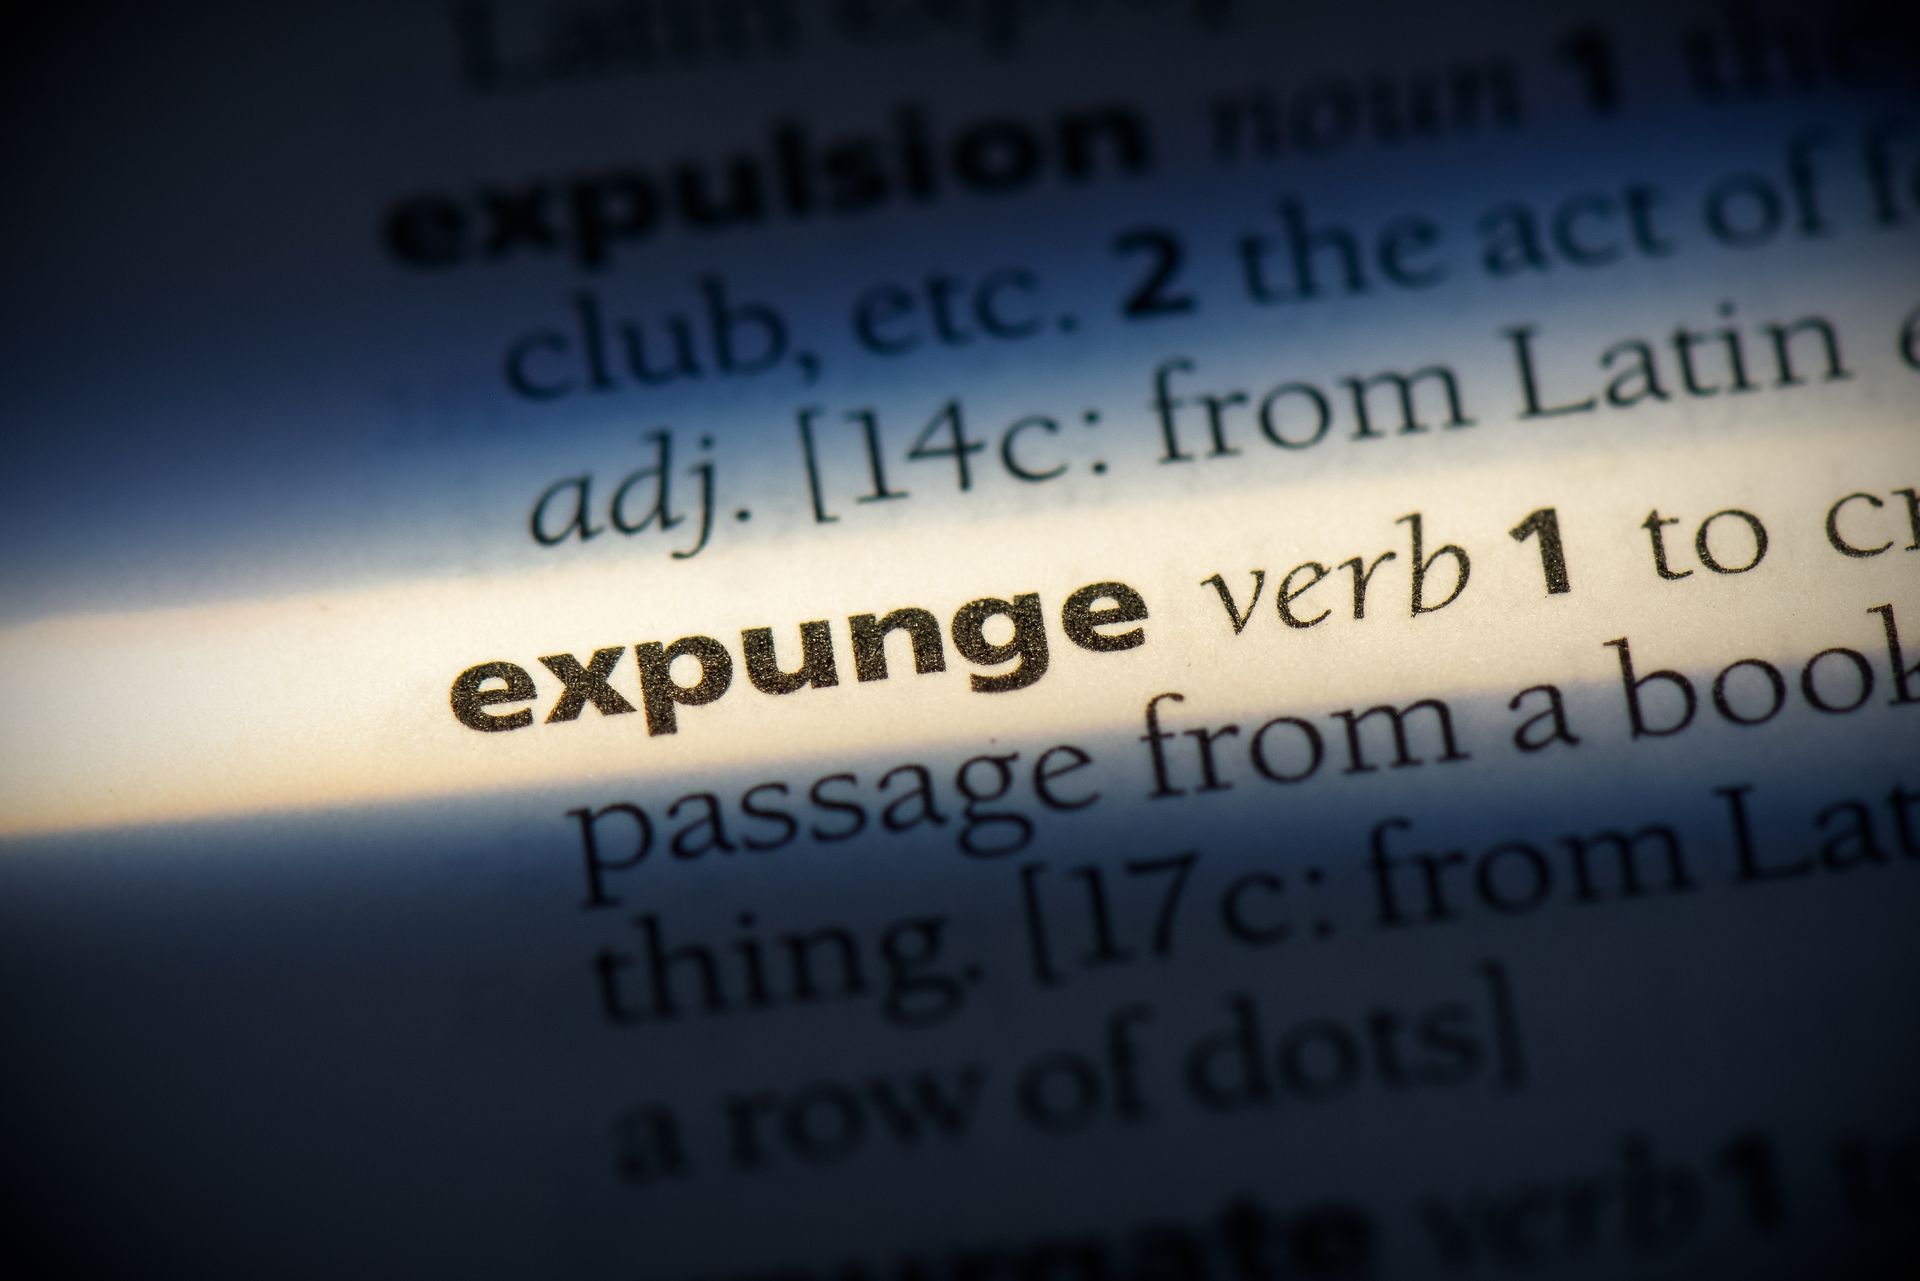 the definition of the word expunge in the context of clean slate laws in the US